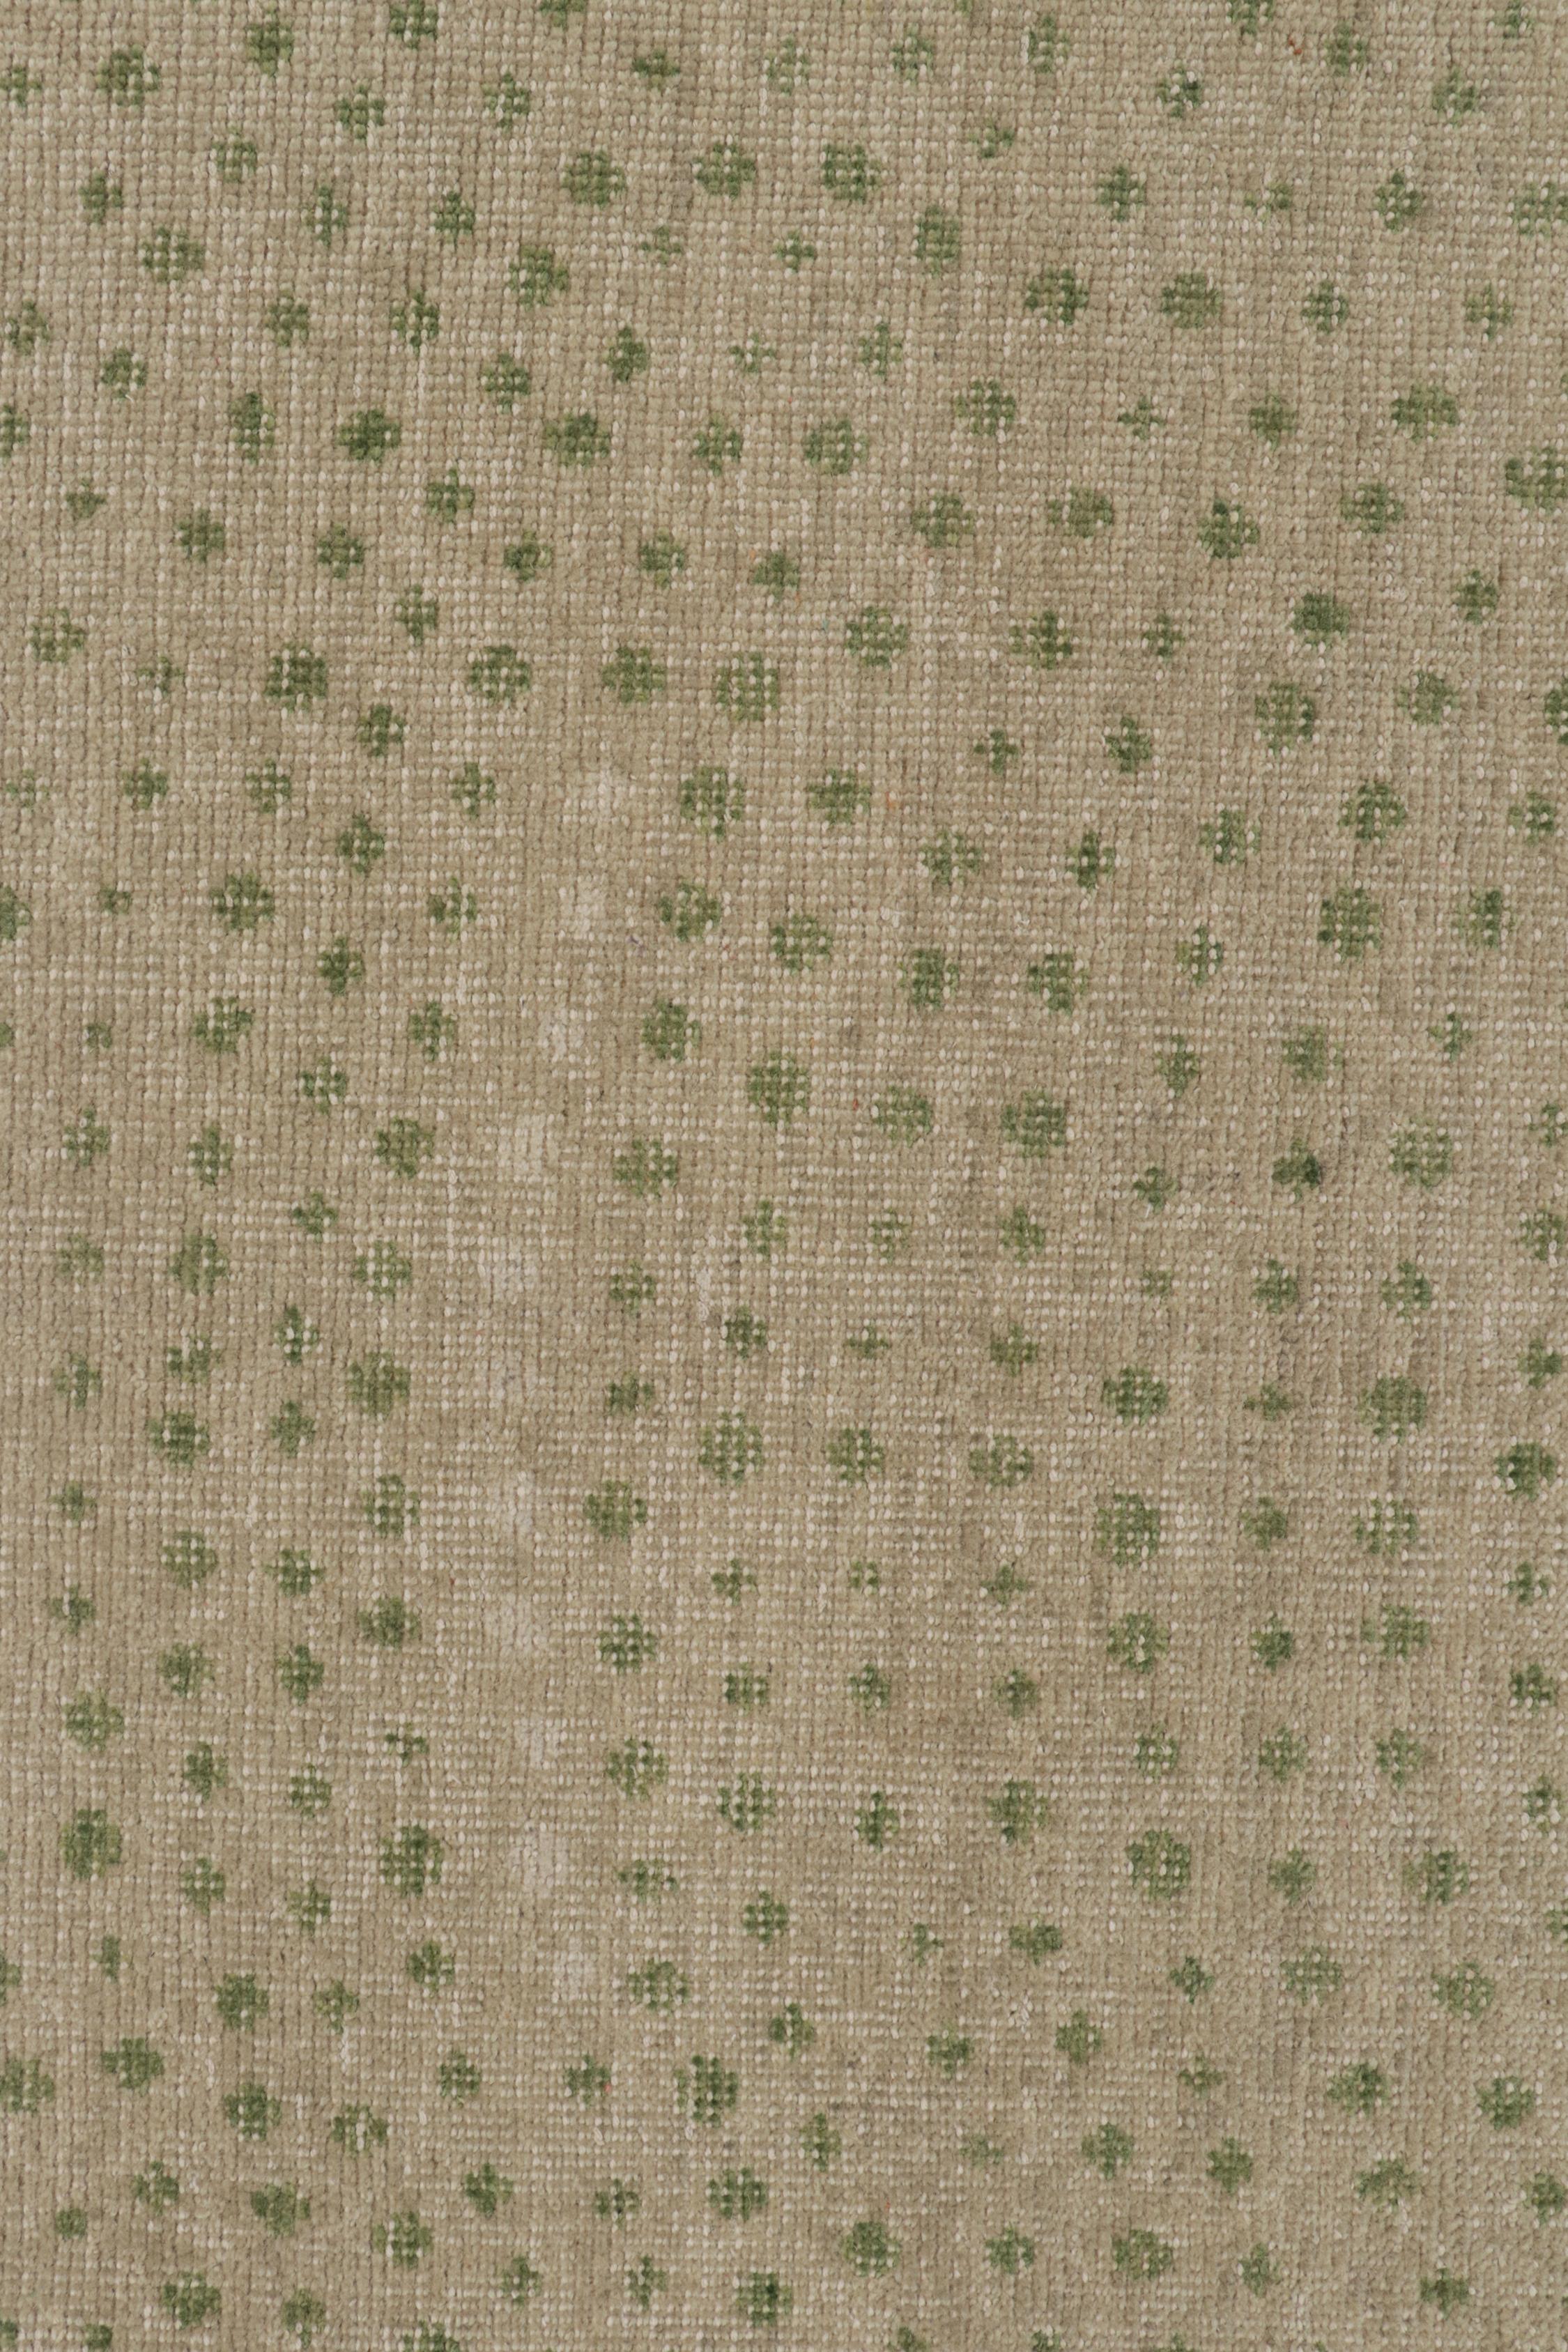 Rug & Kilim’s Distressed Style Extra-Long Runner in Beige with Green Dot Pattern In New Condition For Sale In Long Island City, NY